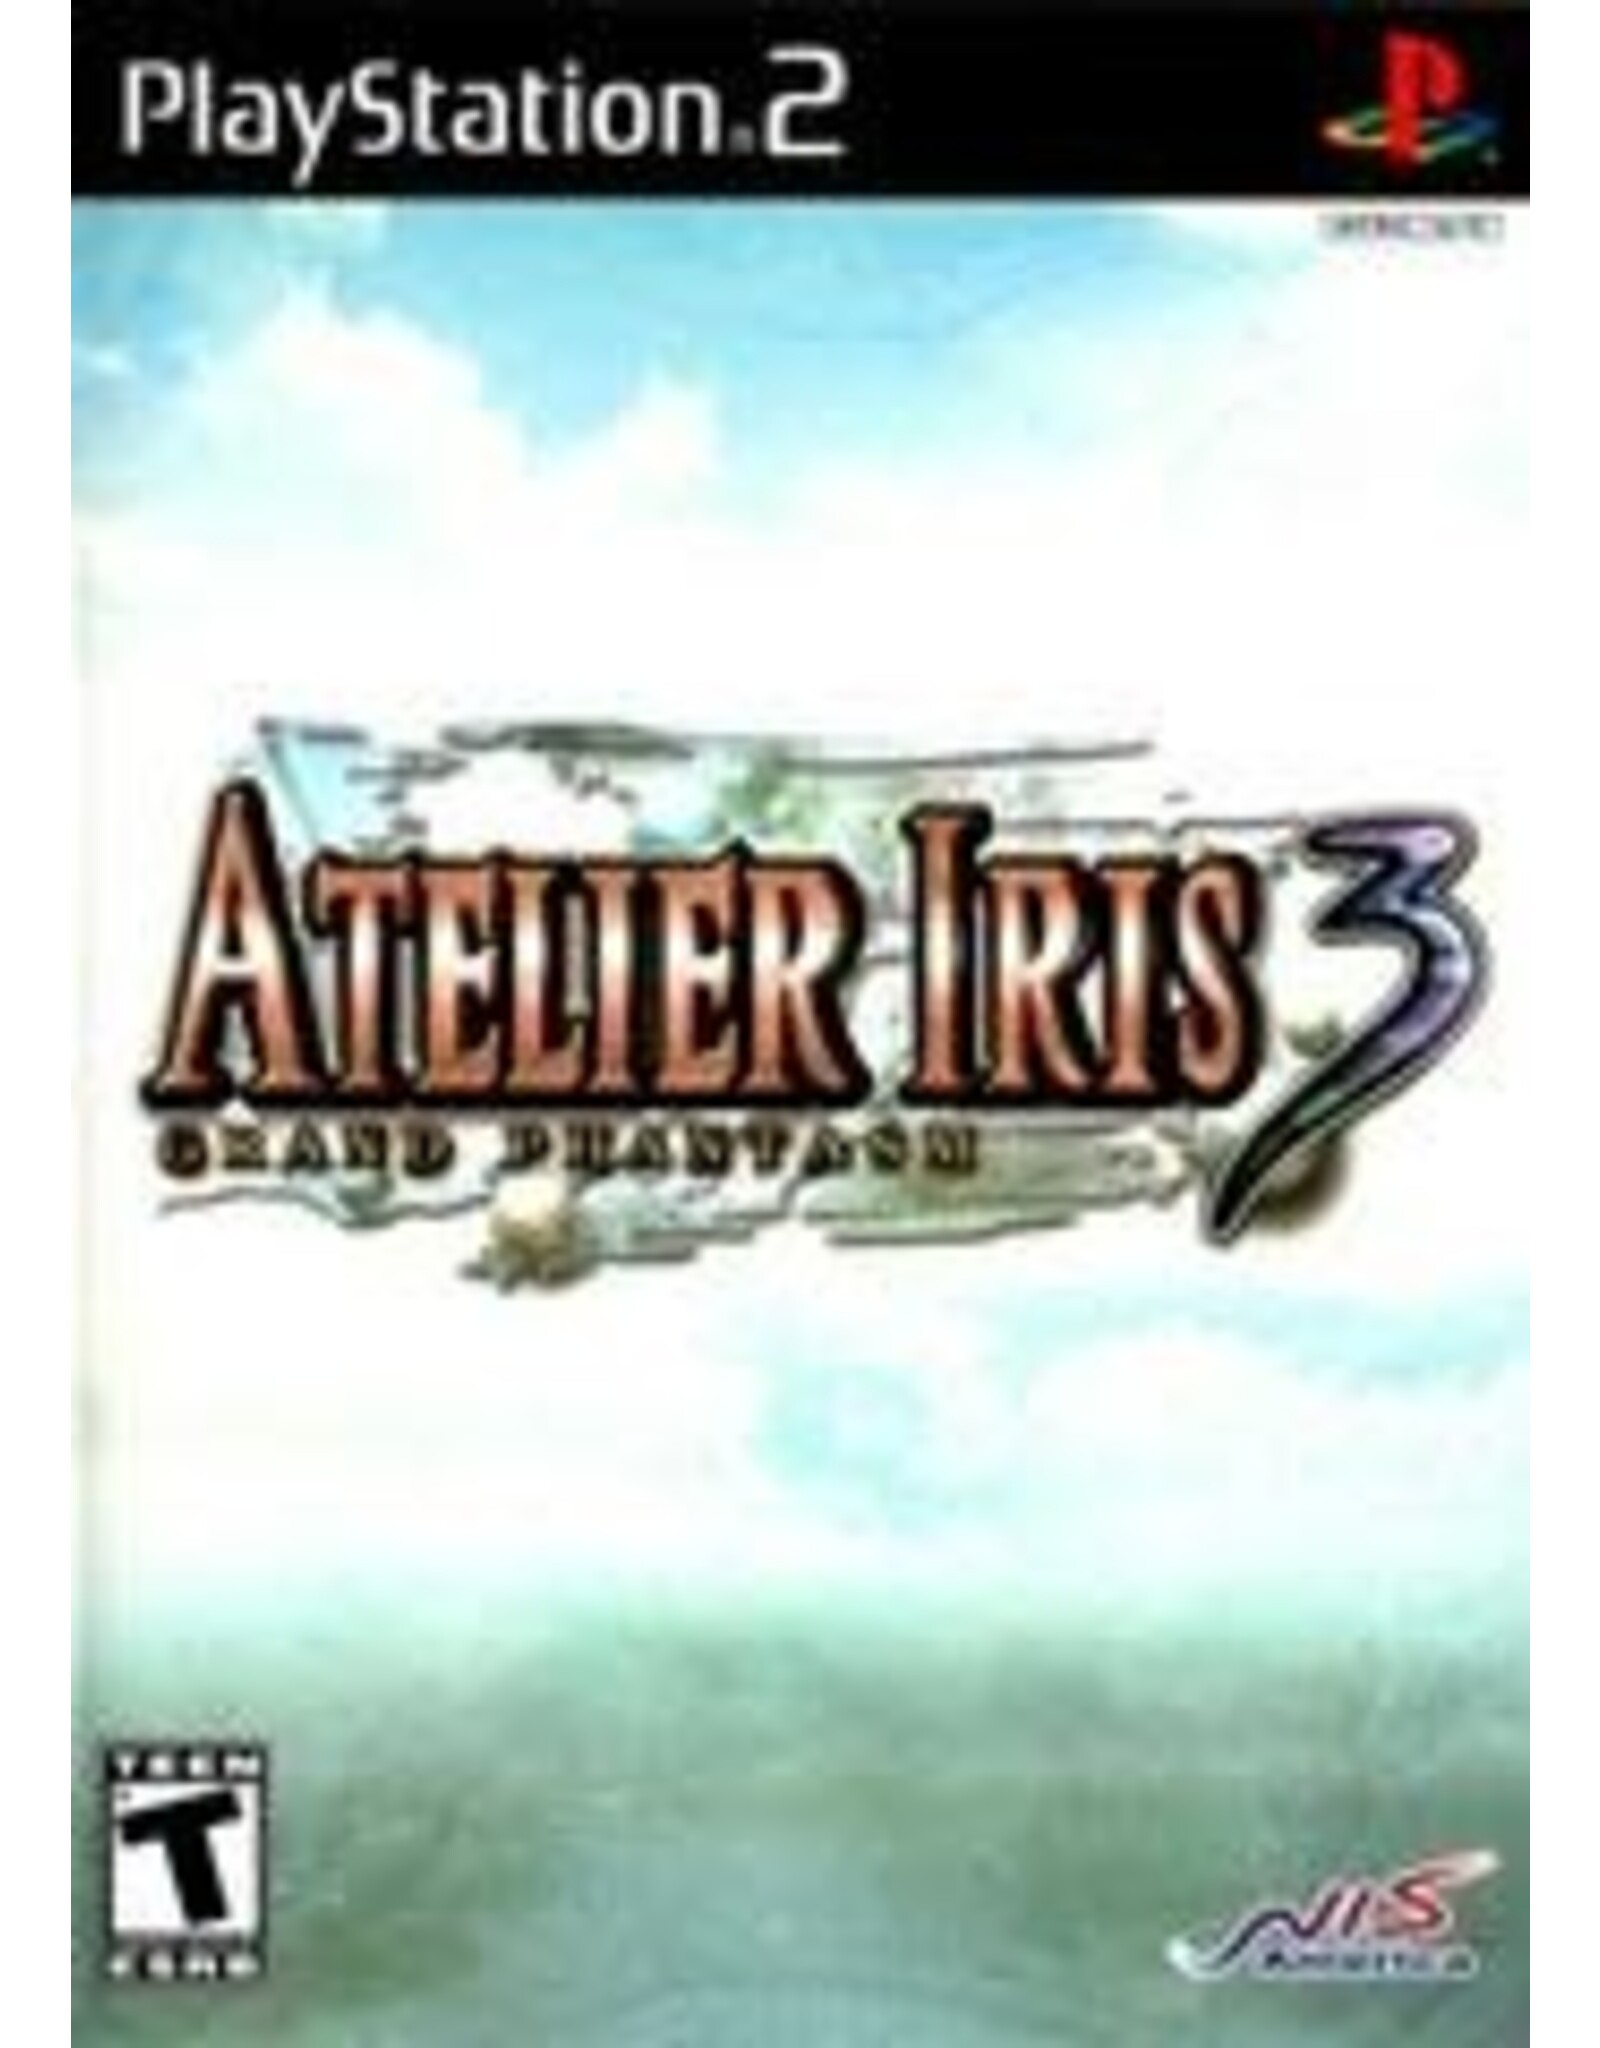 Playstation 2 Atelier Iris 3 (Brand New, Factory Sealed)